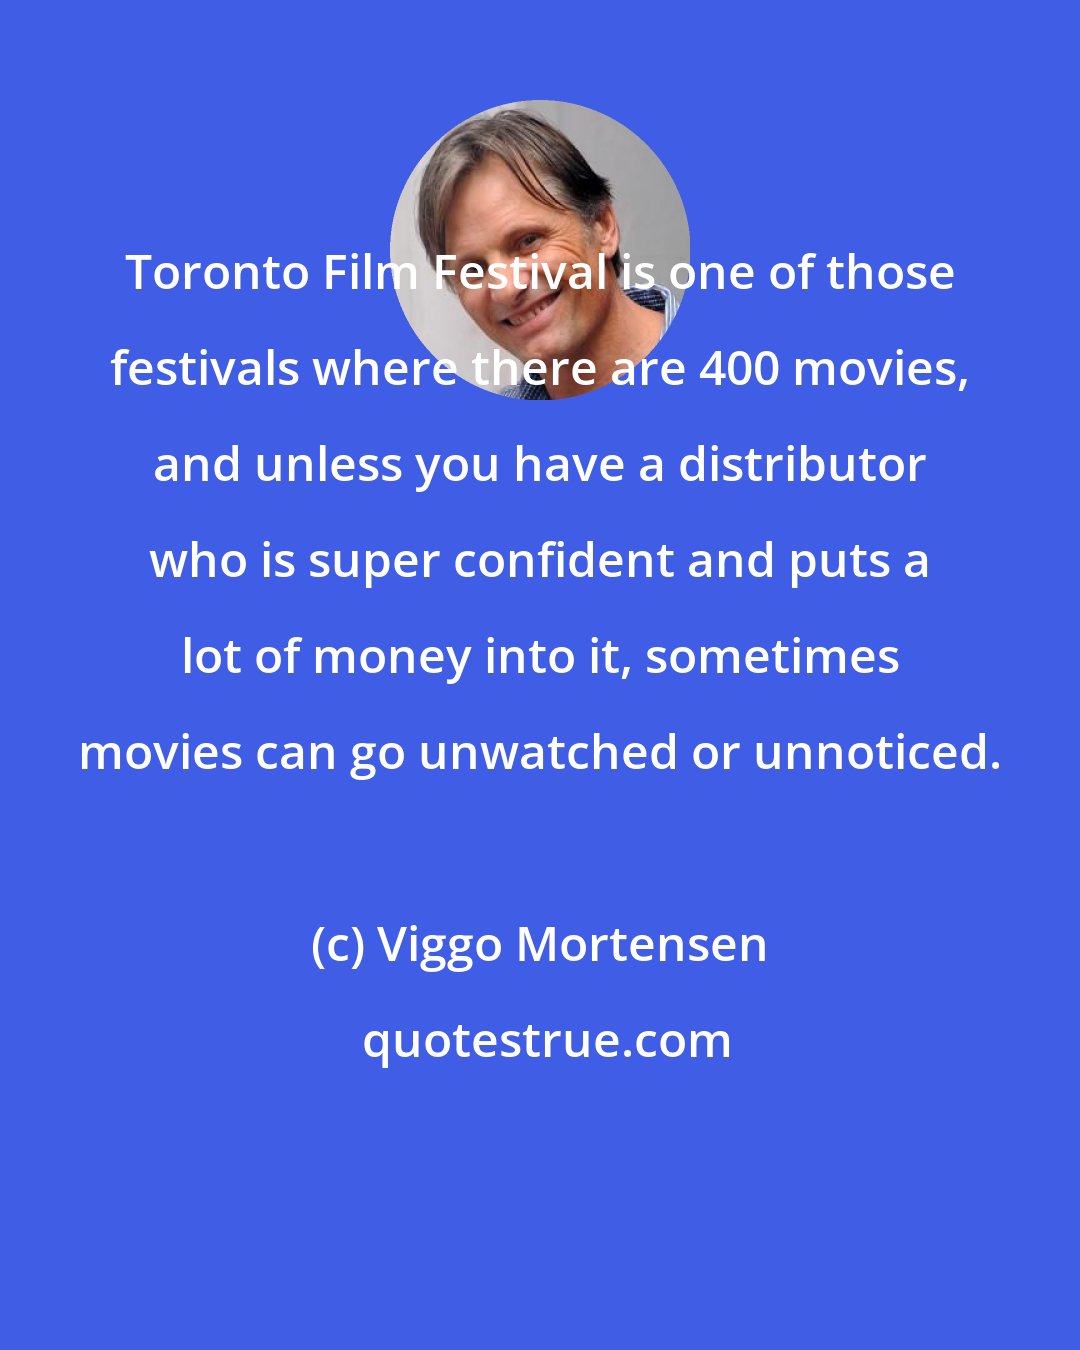 Viggo Mortensen: Toronto Film Festival is one of those festivals where there are 400 movies, and unless you have a distributor who is super confident and puts a lot of money into it, sometimes movies can go unwatched or unnoticed.